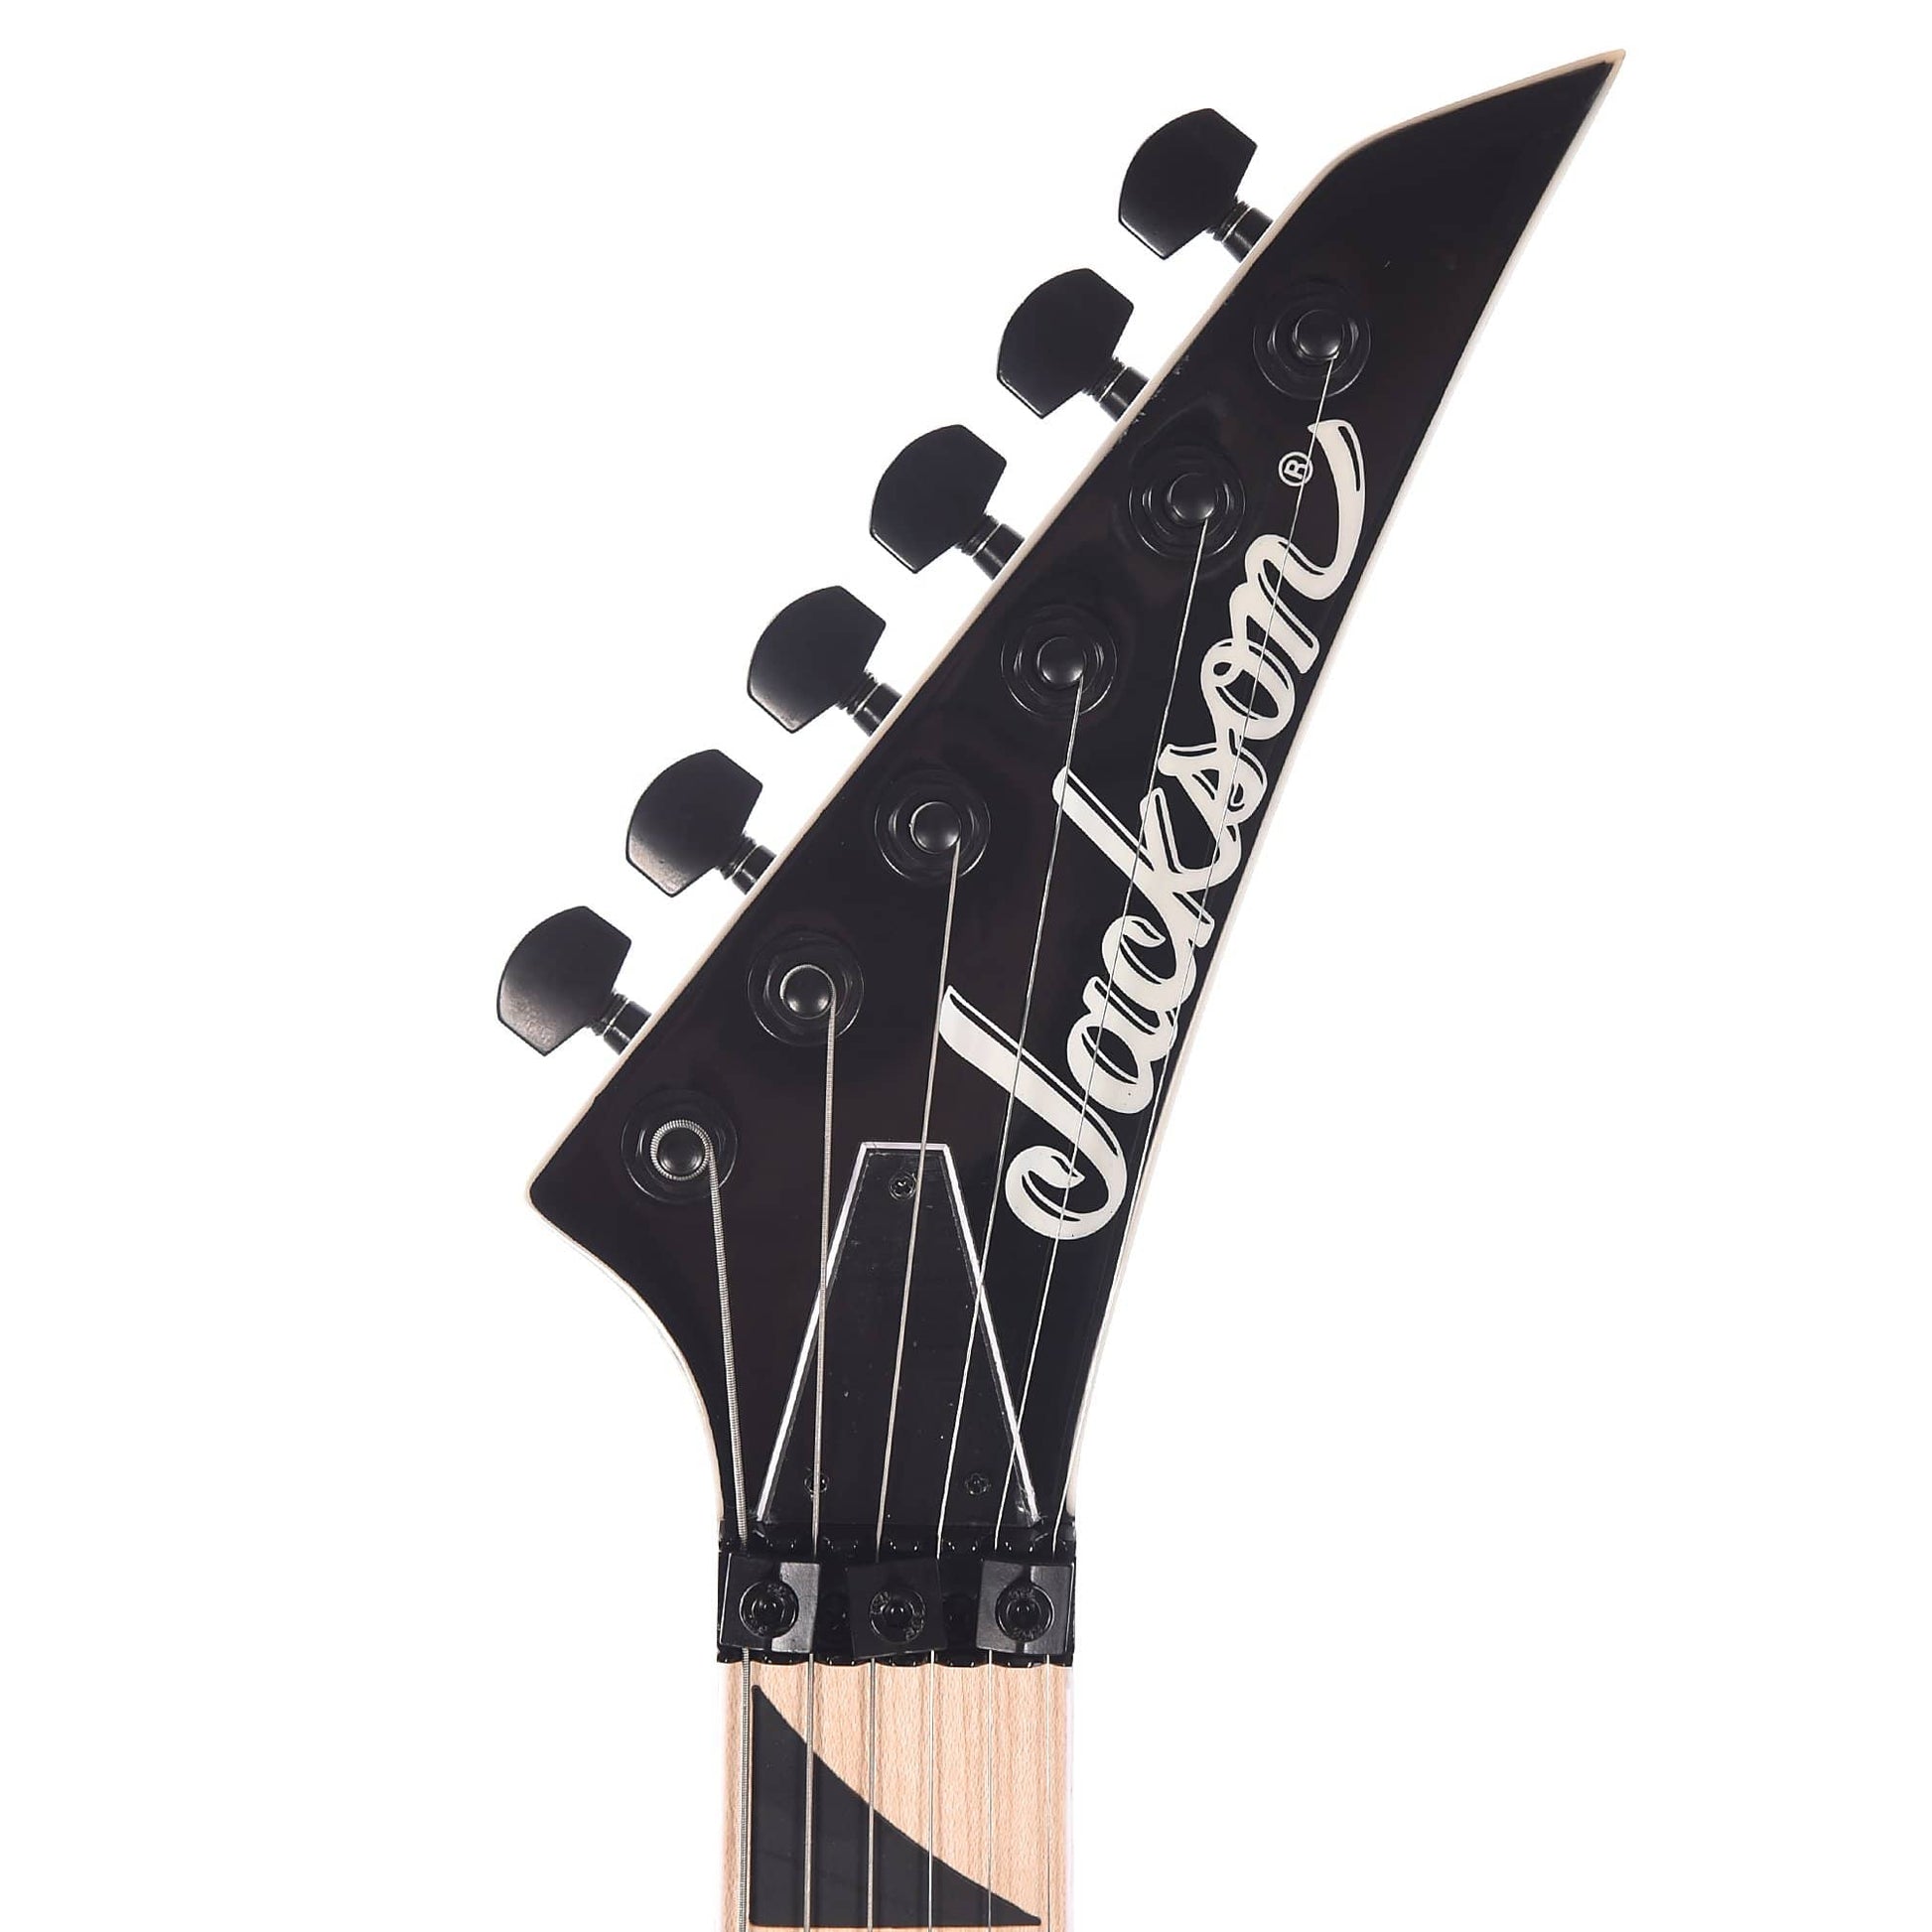 Jackson JS Series Dinky Arch Top JS32 Maple Fingerboard Gloss Black Electric Guitars / Solid Body